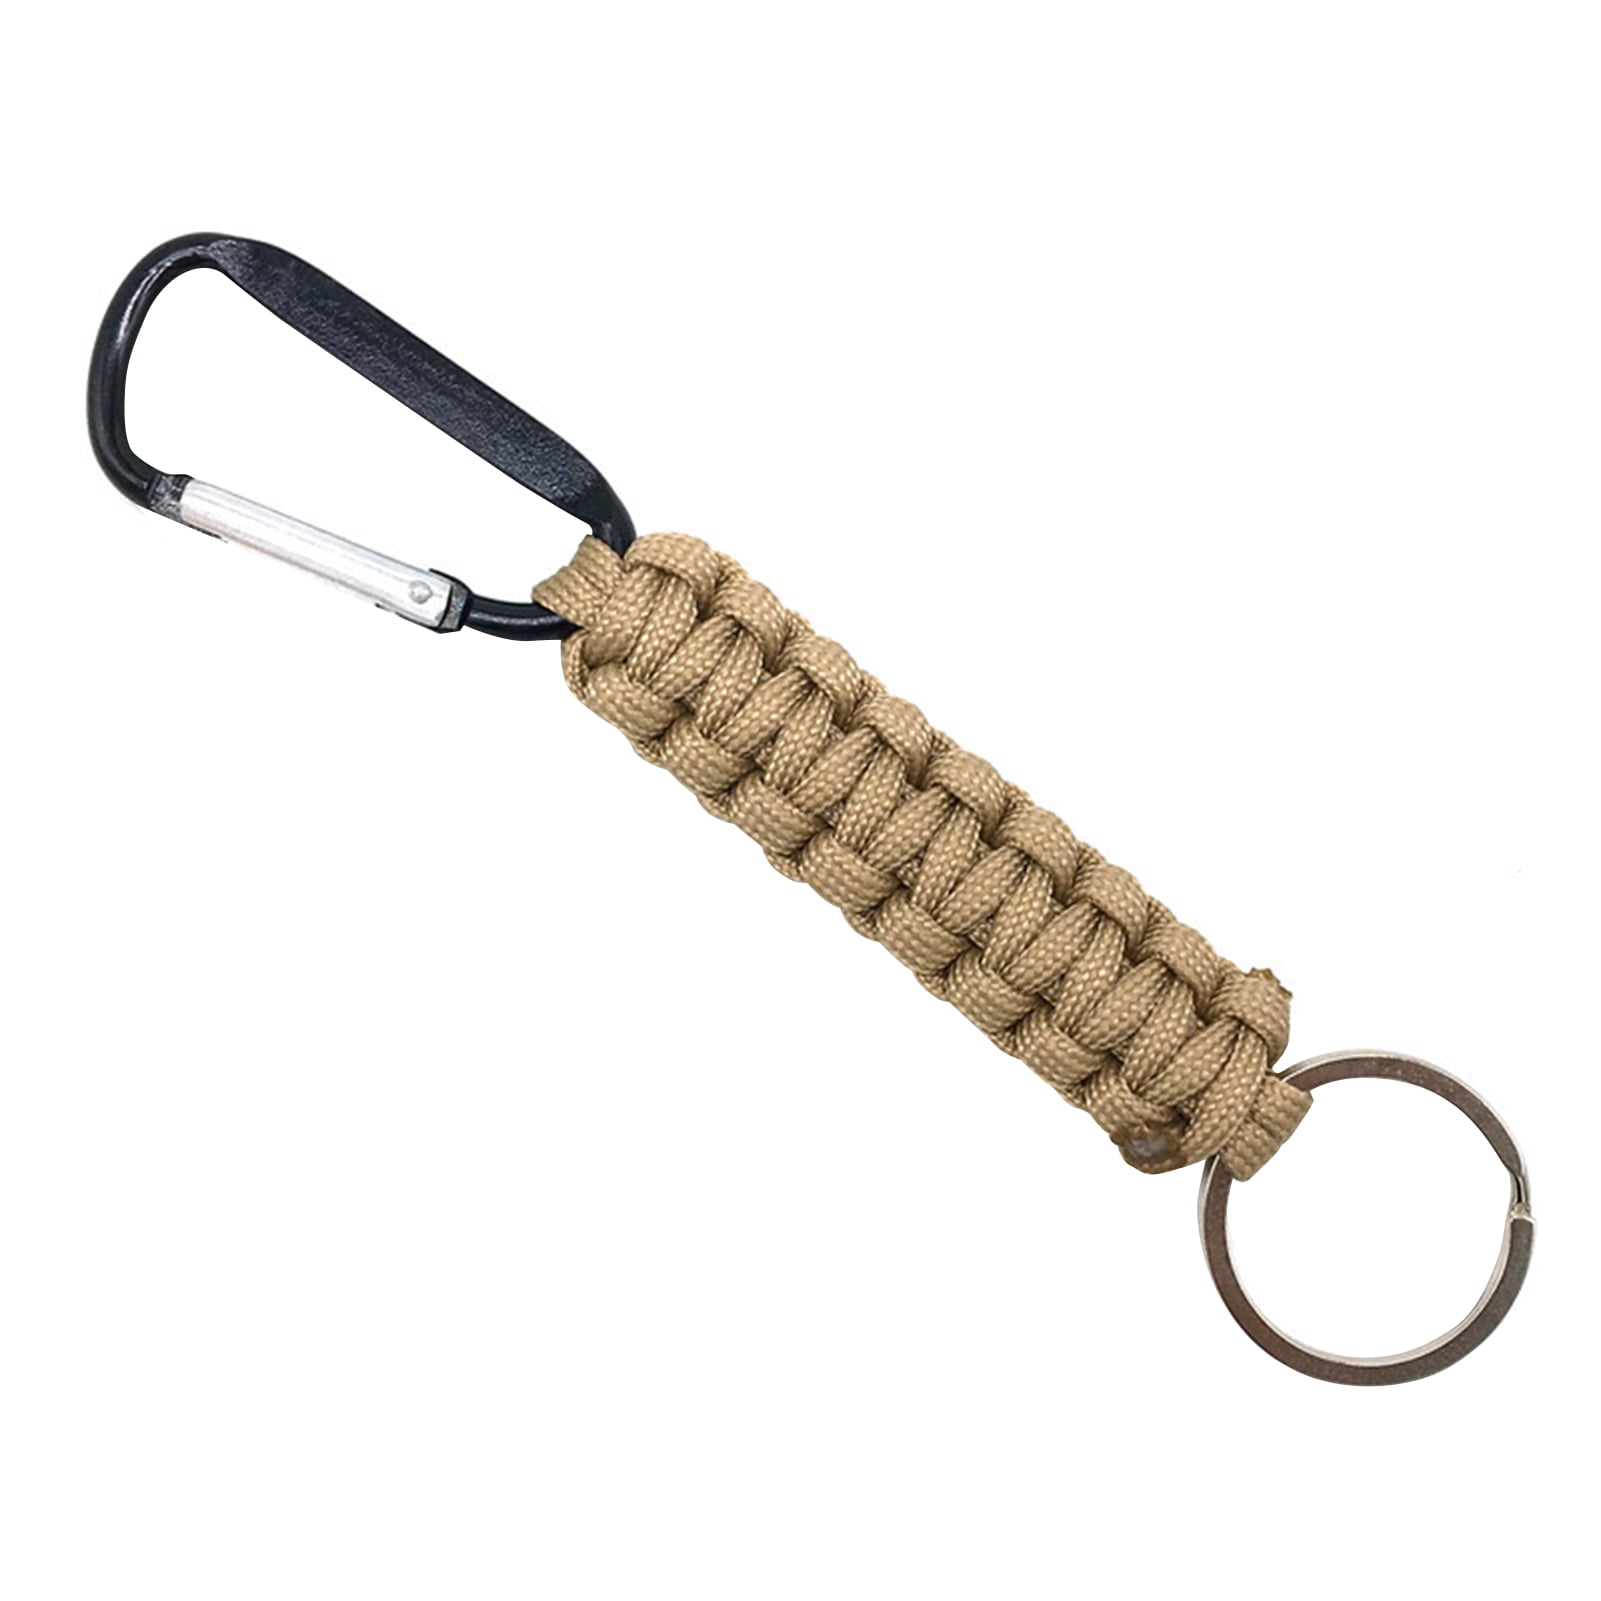 Paracord Hanging Keychain Rope Cord Lanyard load bearing 140kg Survival Camo 